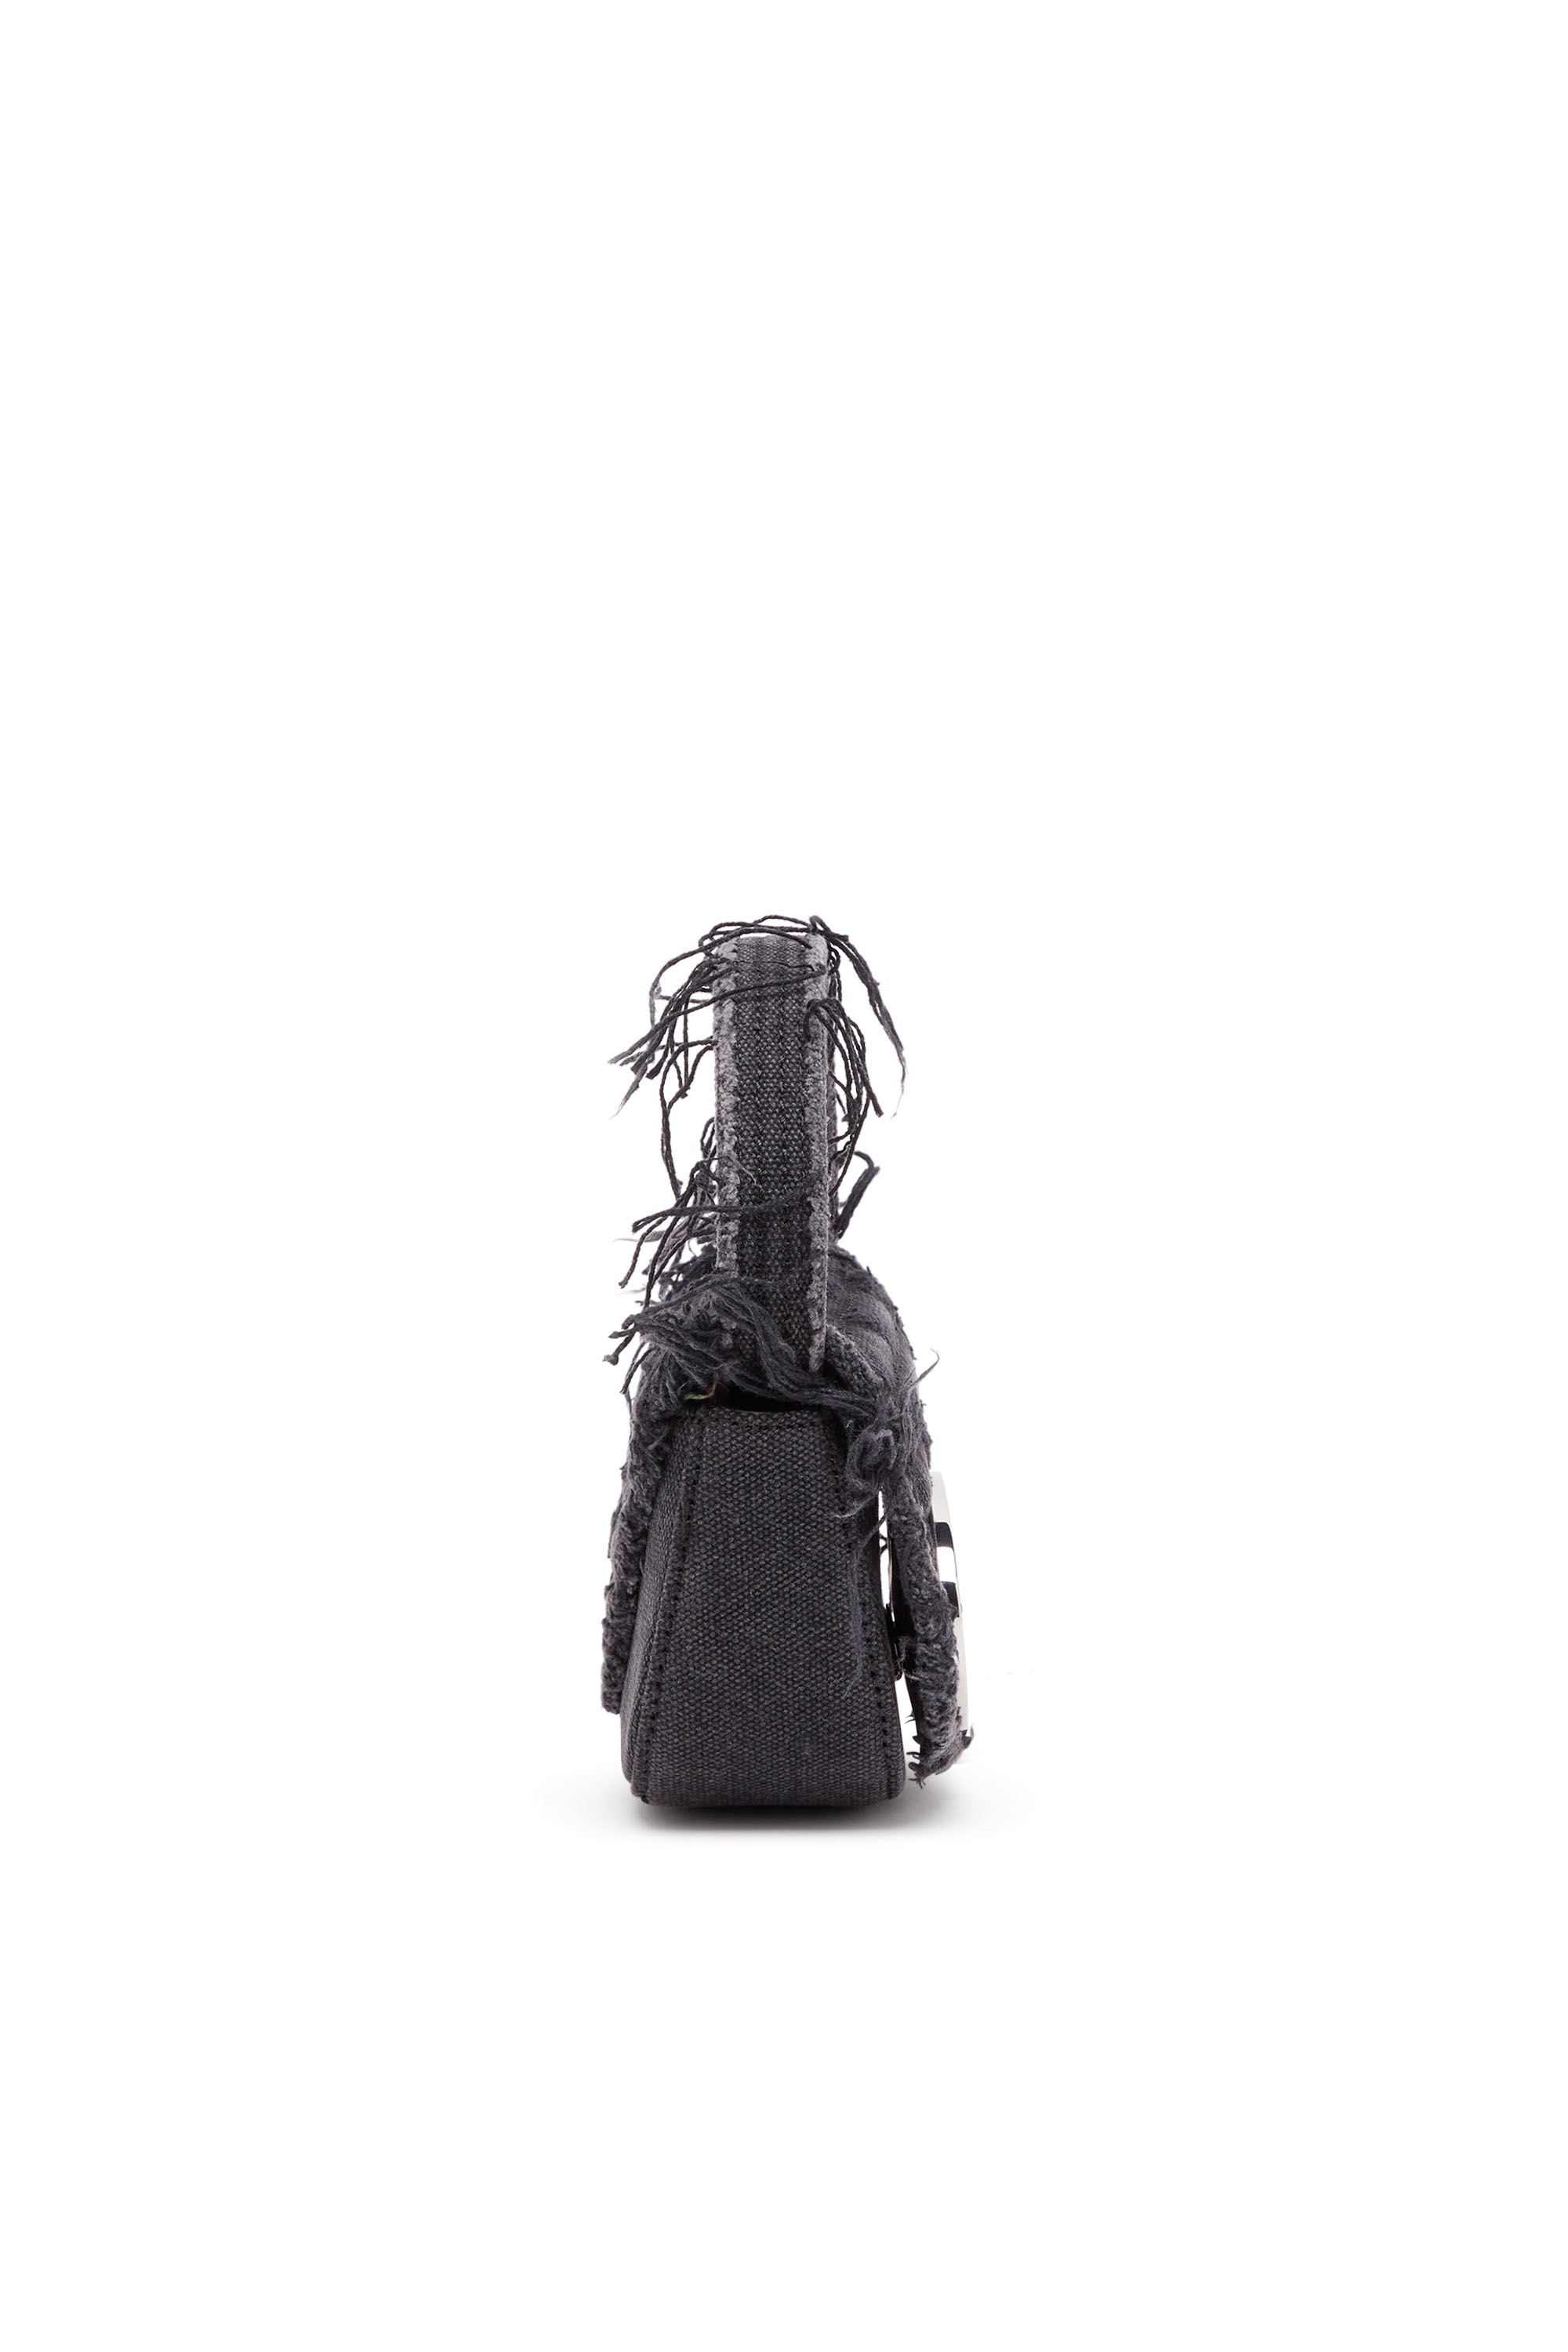 Diesel - 1DR XS, Woman 1DR XS-Iconic mini bag in canvas and leather in Black - Image 3